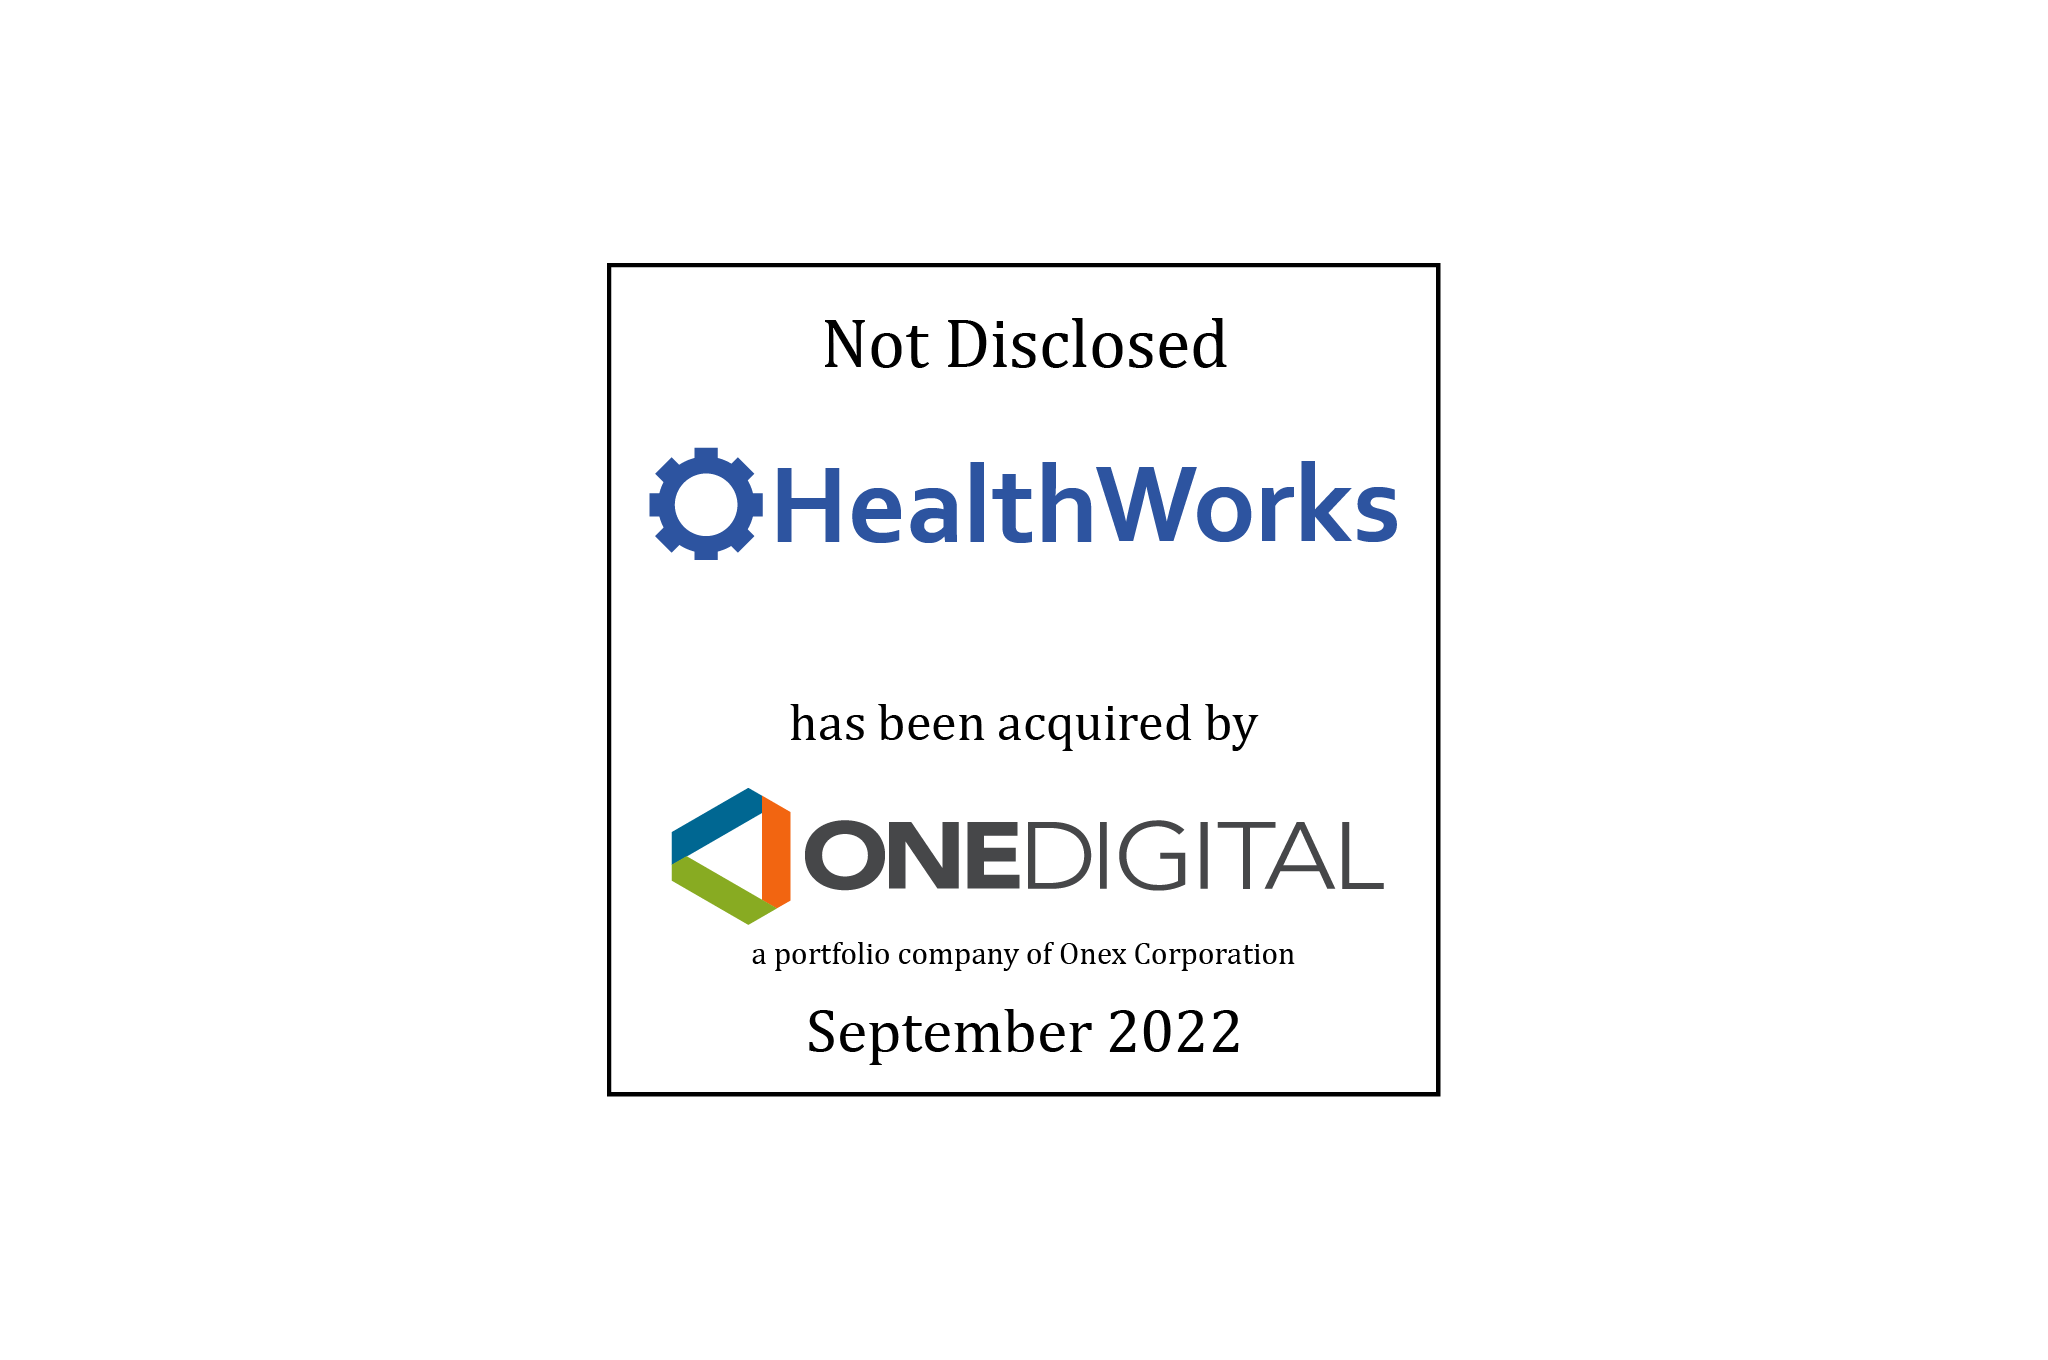 Not Disclosed | Healthworks (logo) Has Been Acquired by OneDigital (logo), a portfolio company of Onex Corporation | September 2022